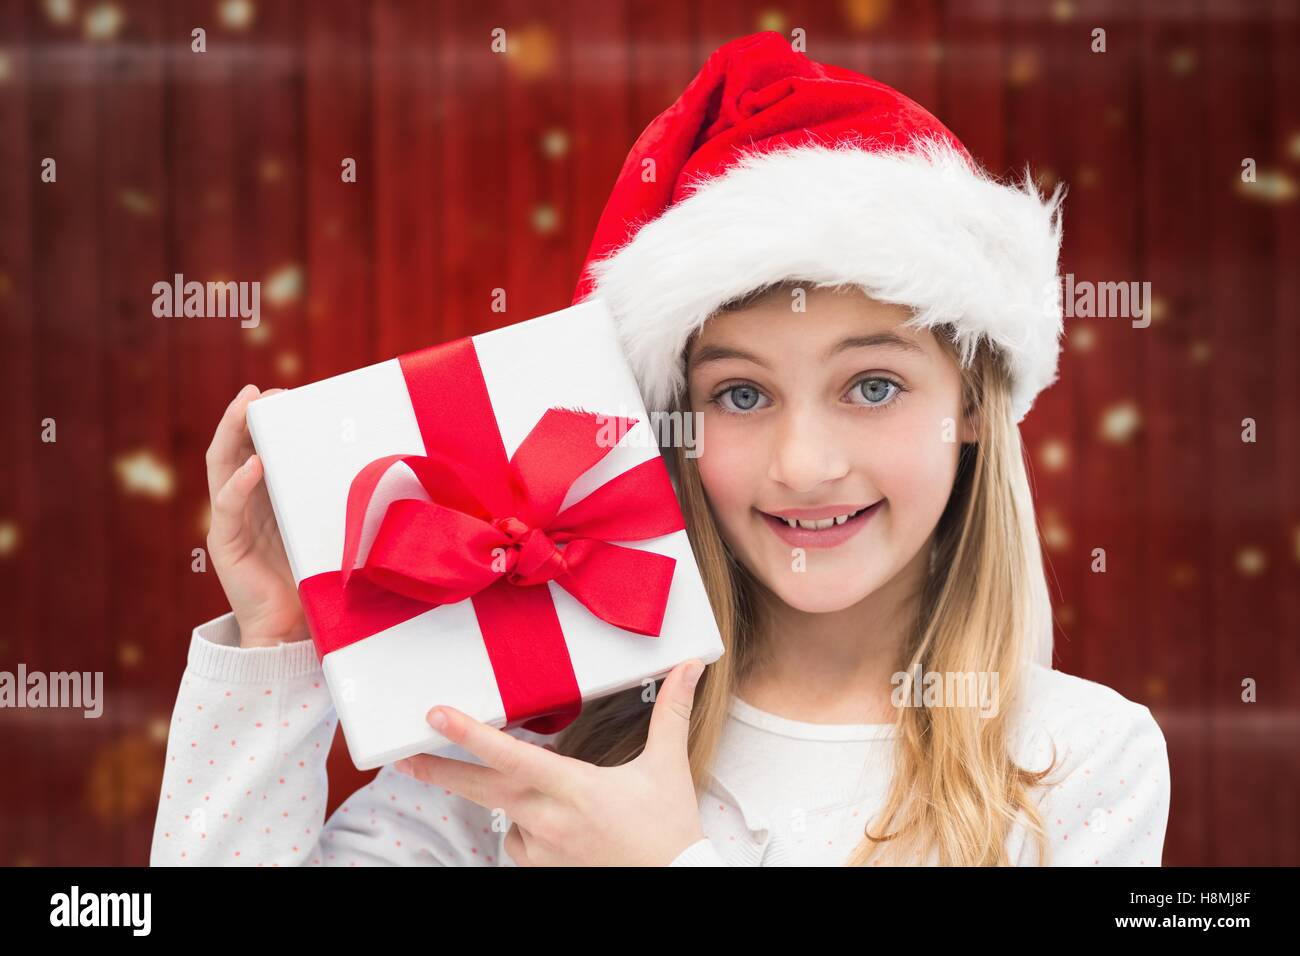 Girl in santa hat holding christmas gifts Stock Photo